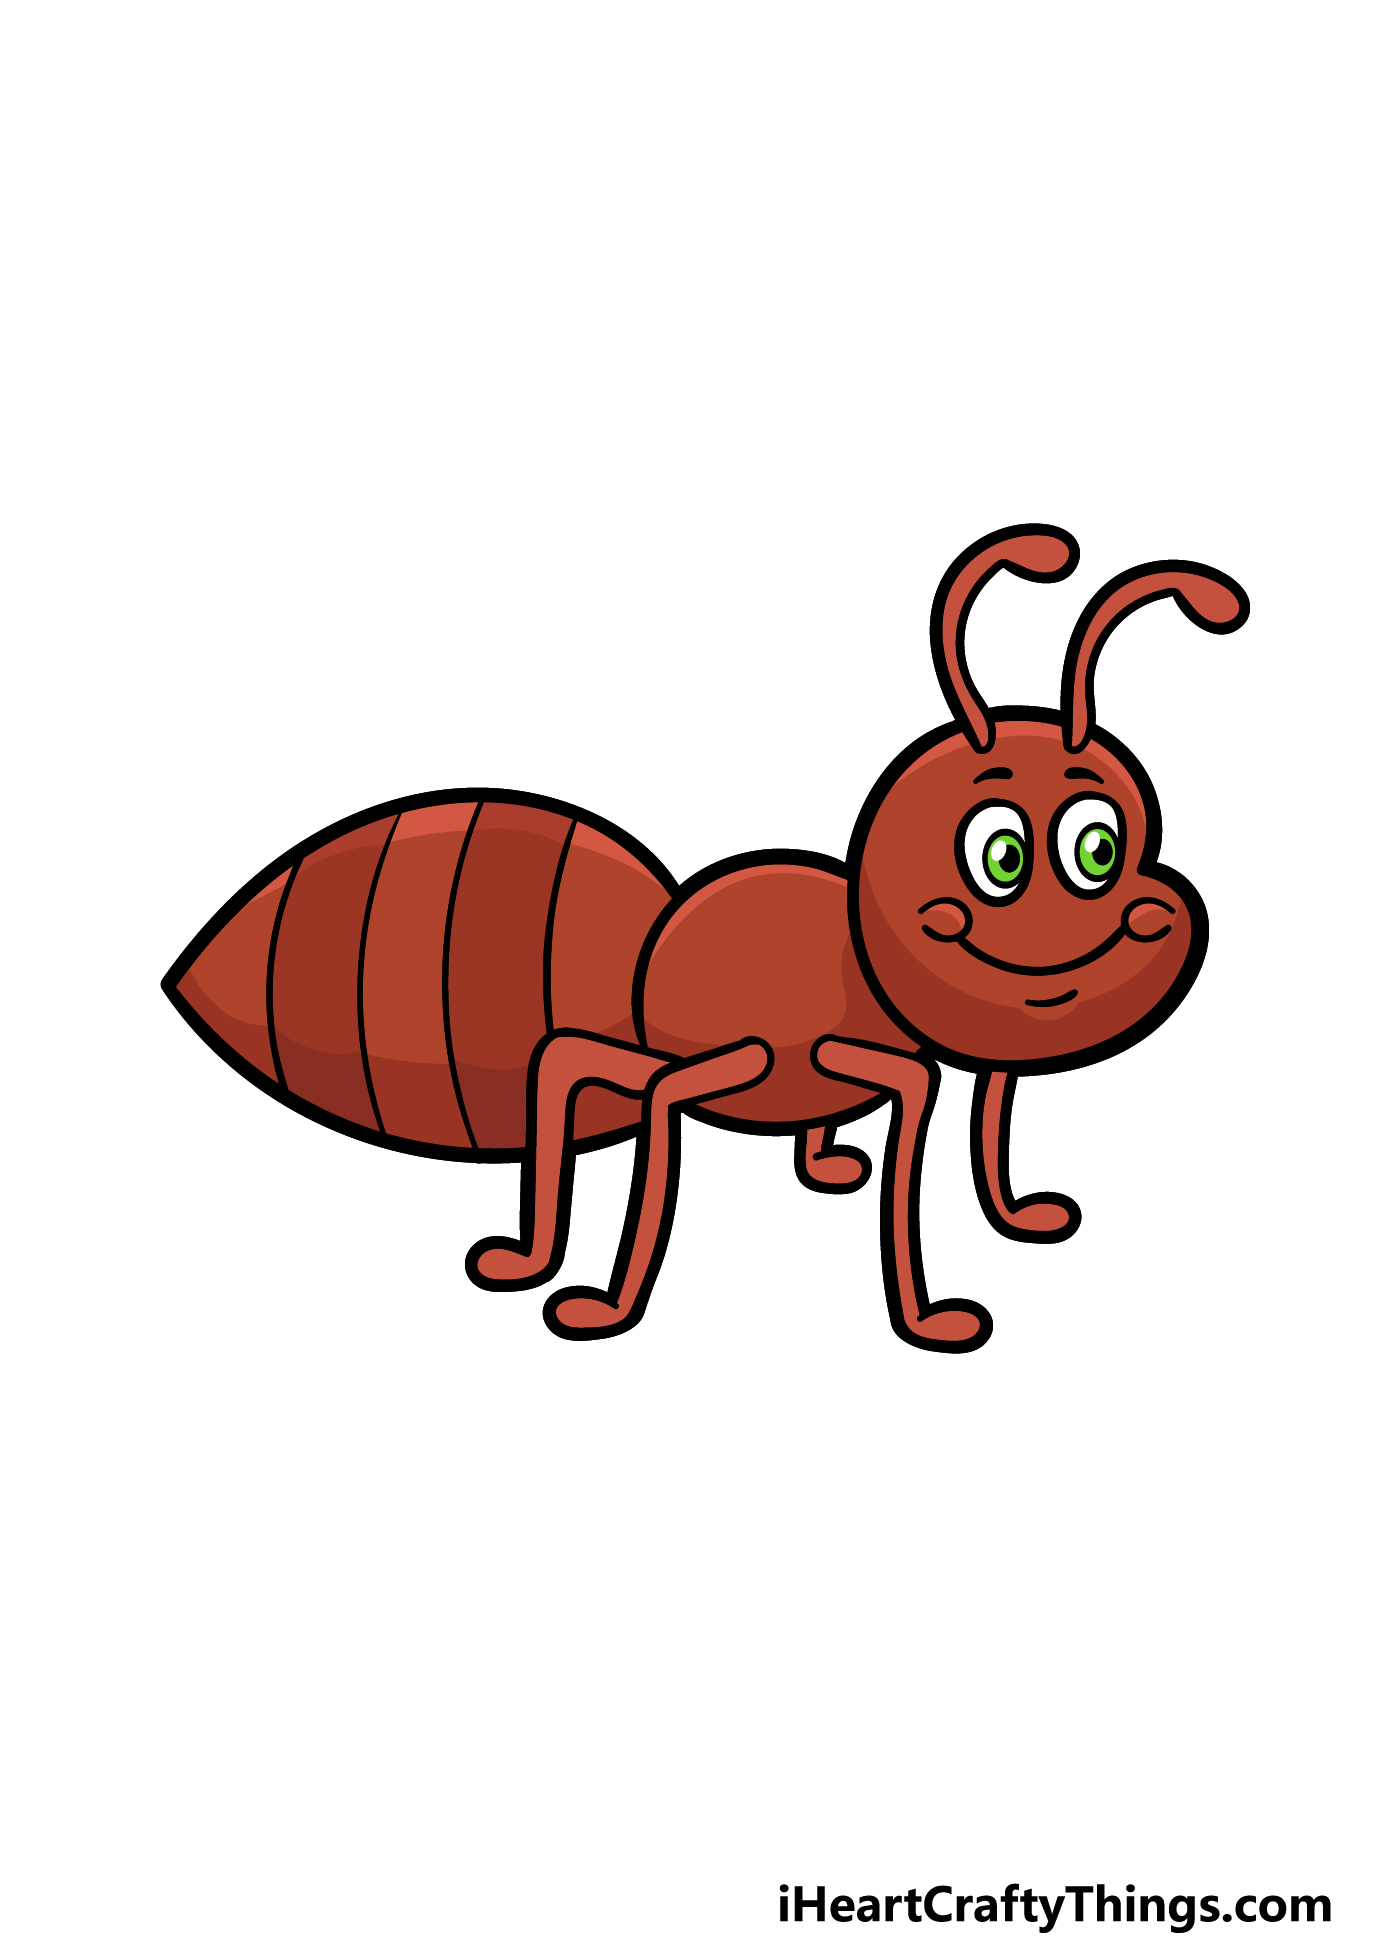 Cartoon Ant Drawing - How To Draw Cartoon Ant Step By Step!